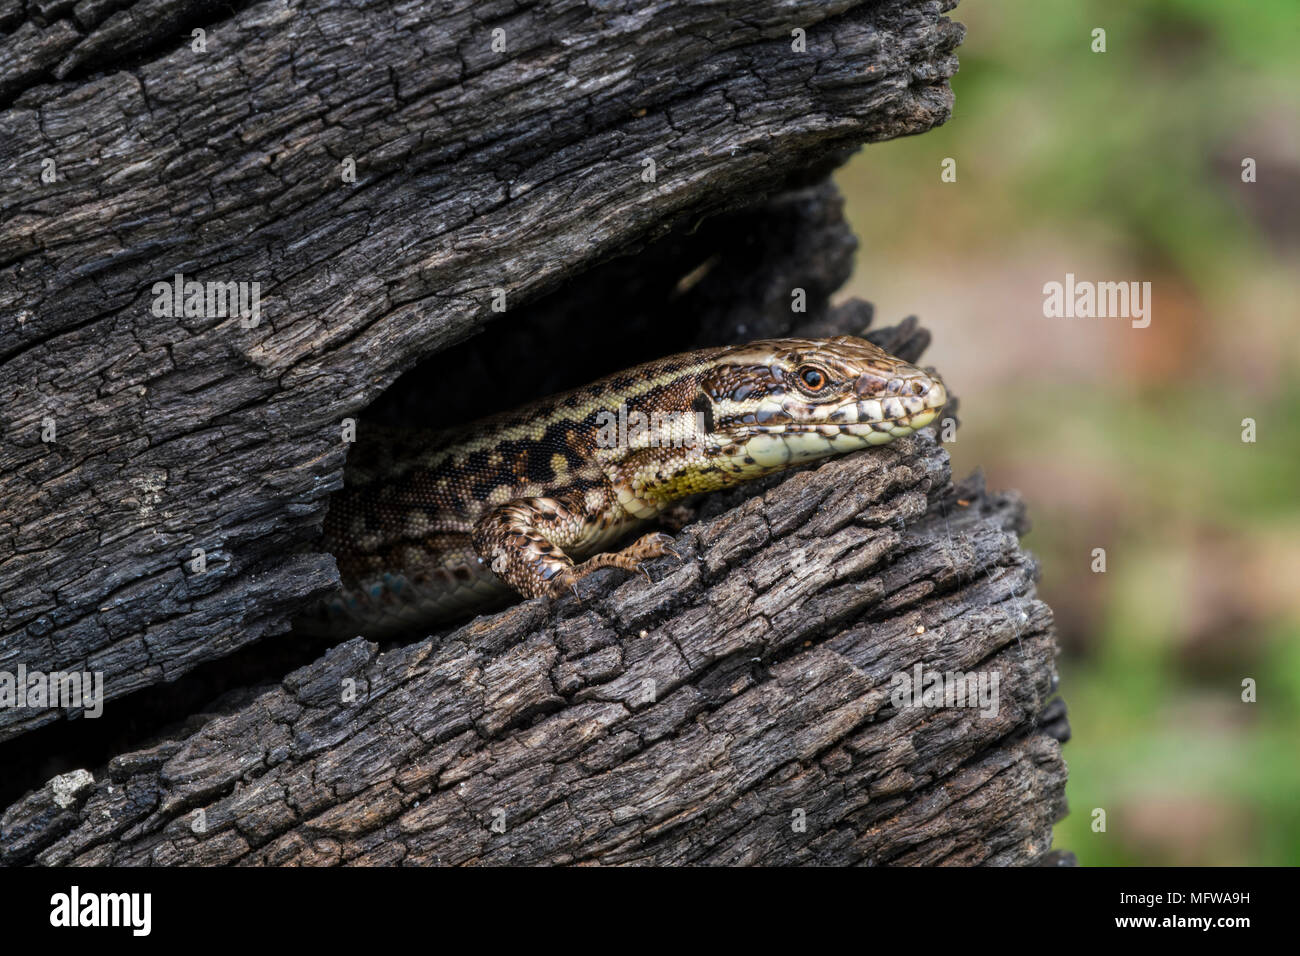 Common wall lizard (Podarcis muralis / Lacerta muralis) emerging from gap in scorched tree trunk Stock Photo